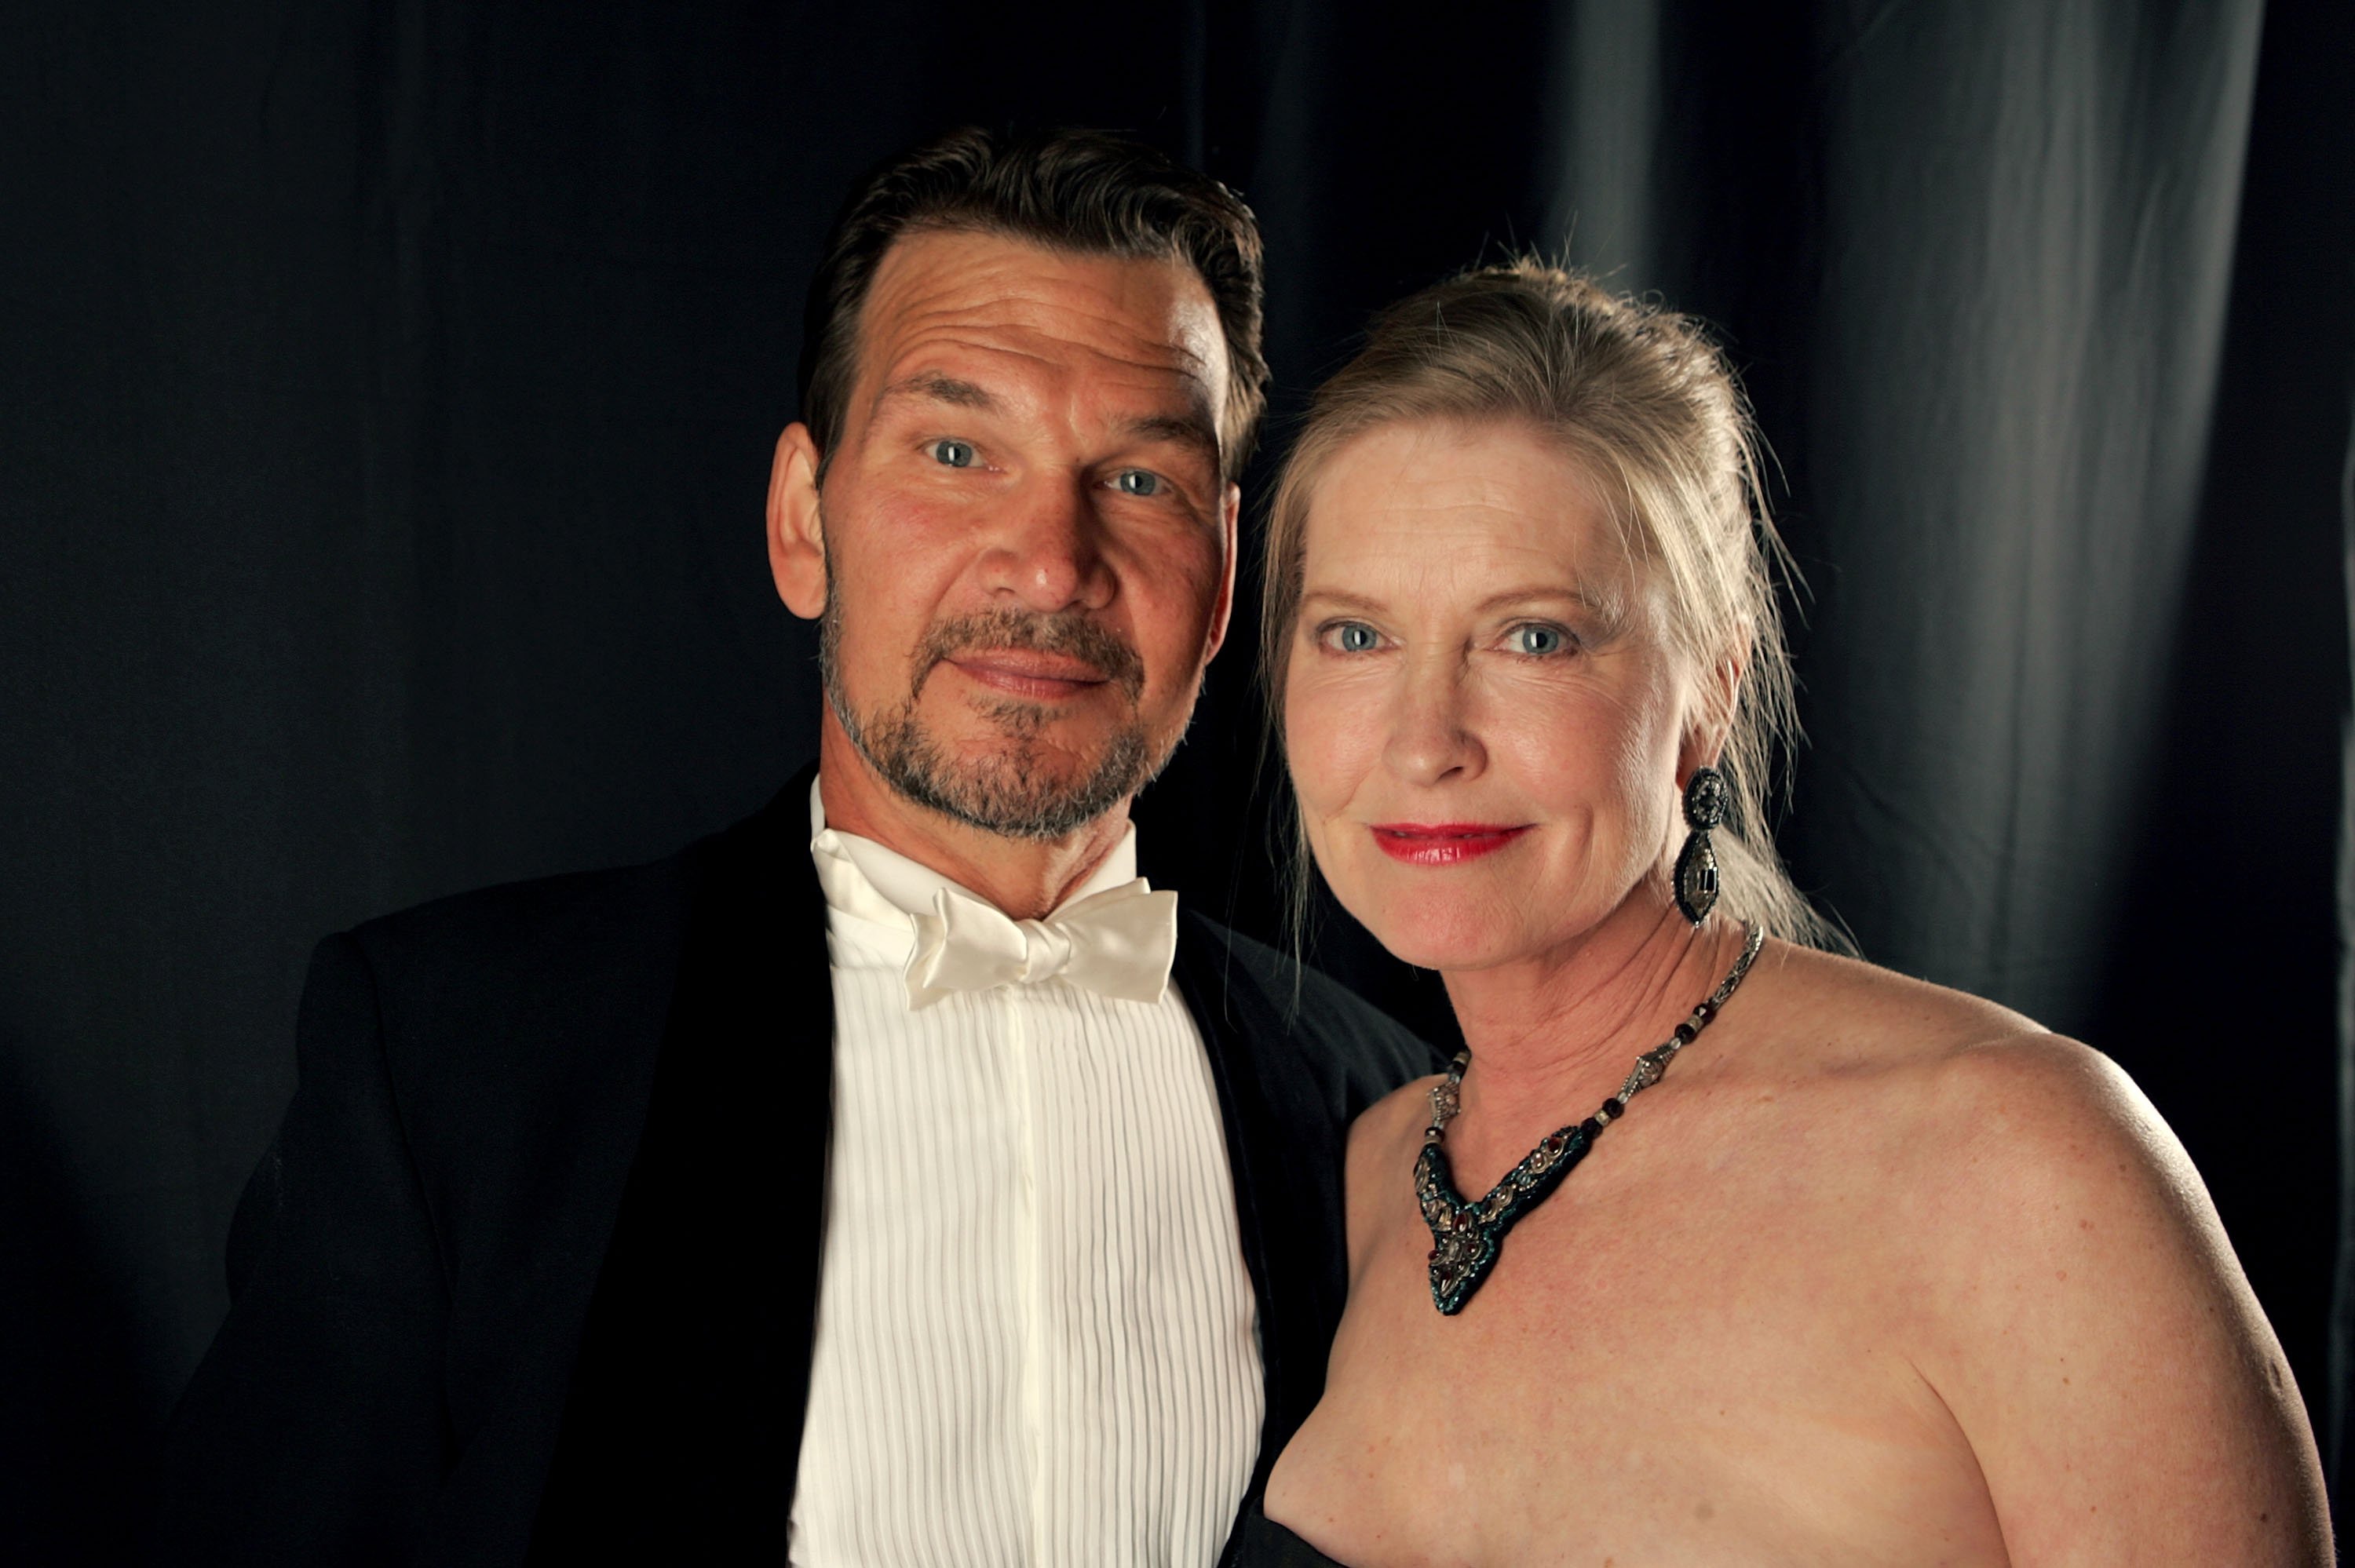  Patrick Swayze  and wife Lisa Niemi pose backstage during the 9th annual Costume Designers Guild Awards held at the Beverly Wilshire Hotel on February 17, 2007 | Photo: Getty Images